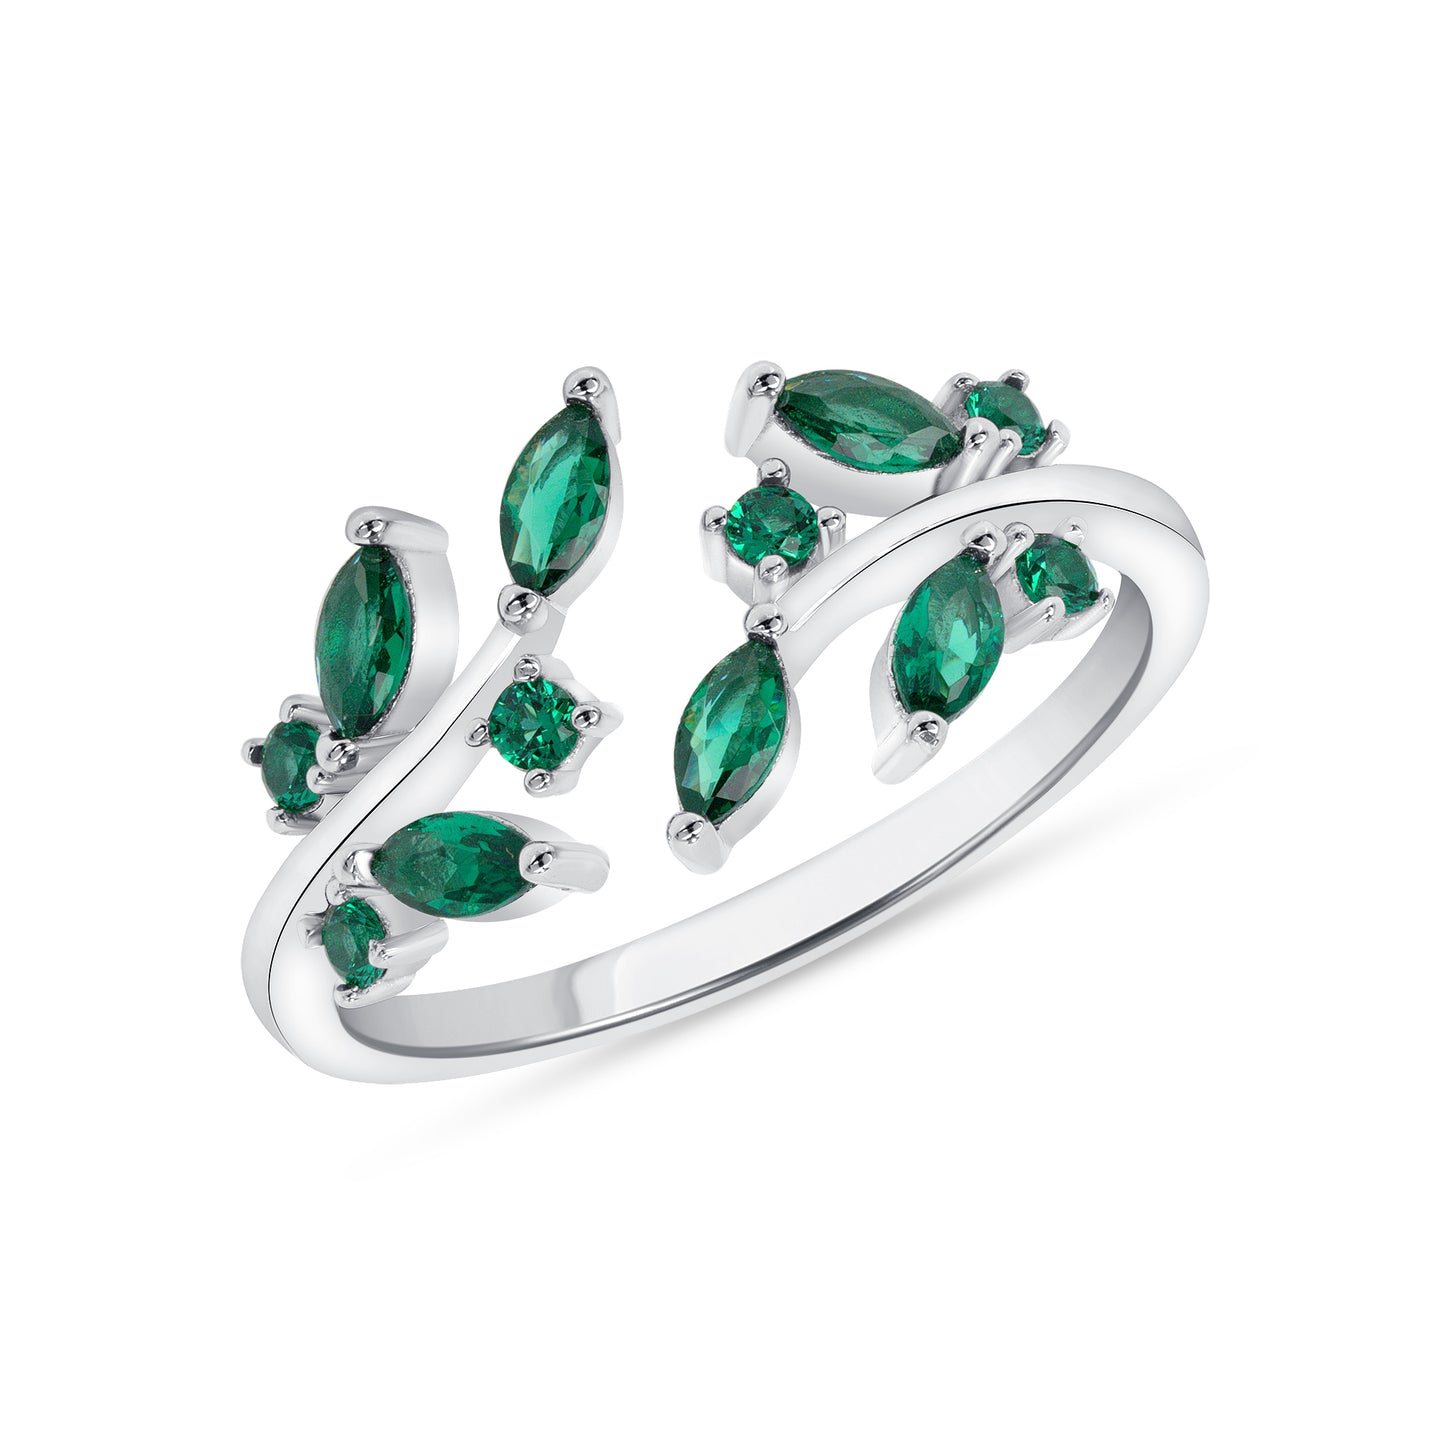 Silver 925 Rhodium Plated Green Emerald Cubic Zirconia Leaves Ring. DGR2372